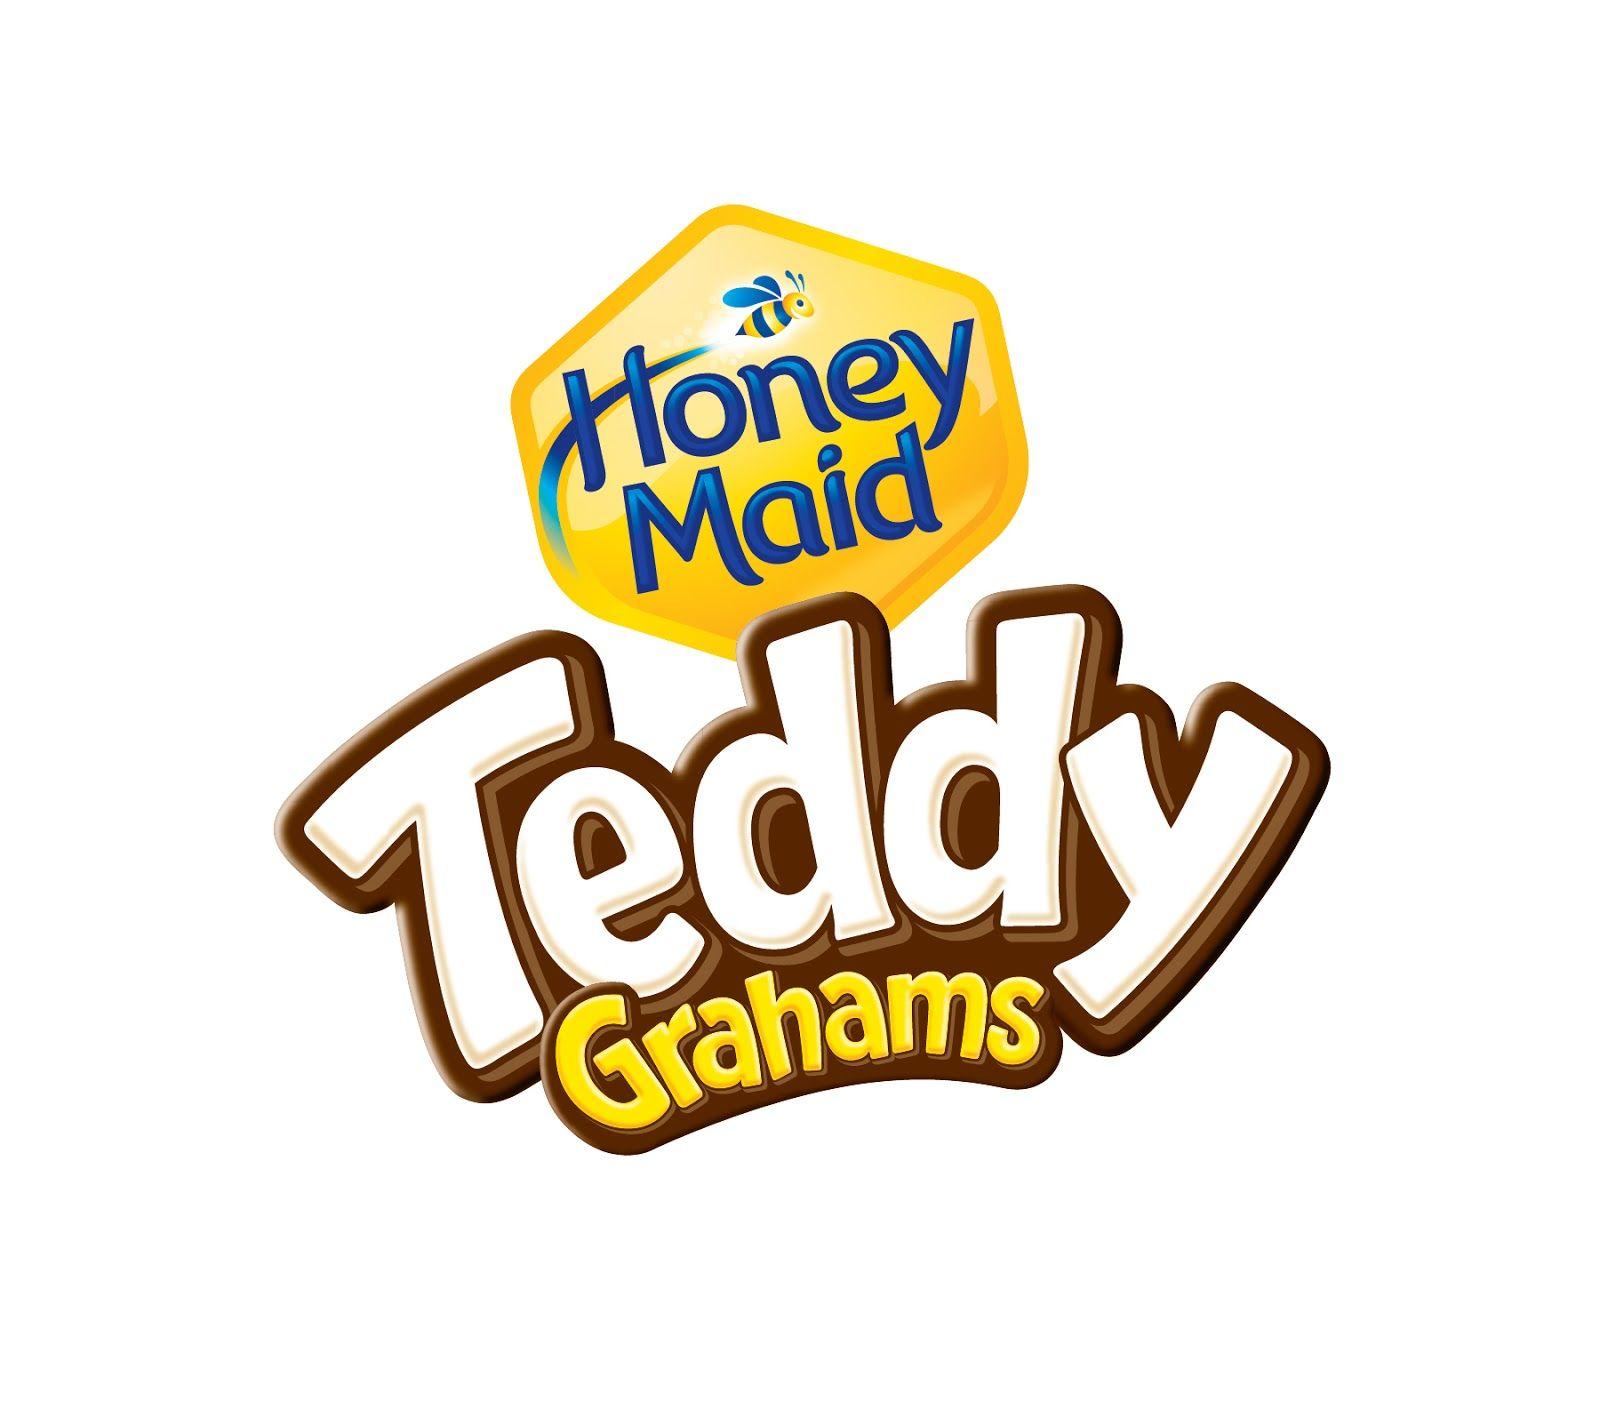 Biscuits Logo - Teddy (biscuits) | Logopedia | FANDOM powered by Wikia